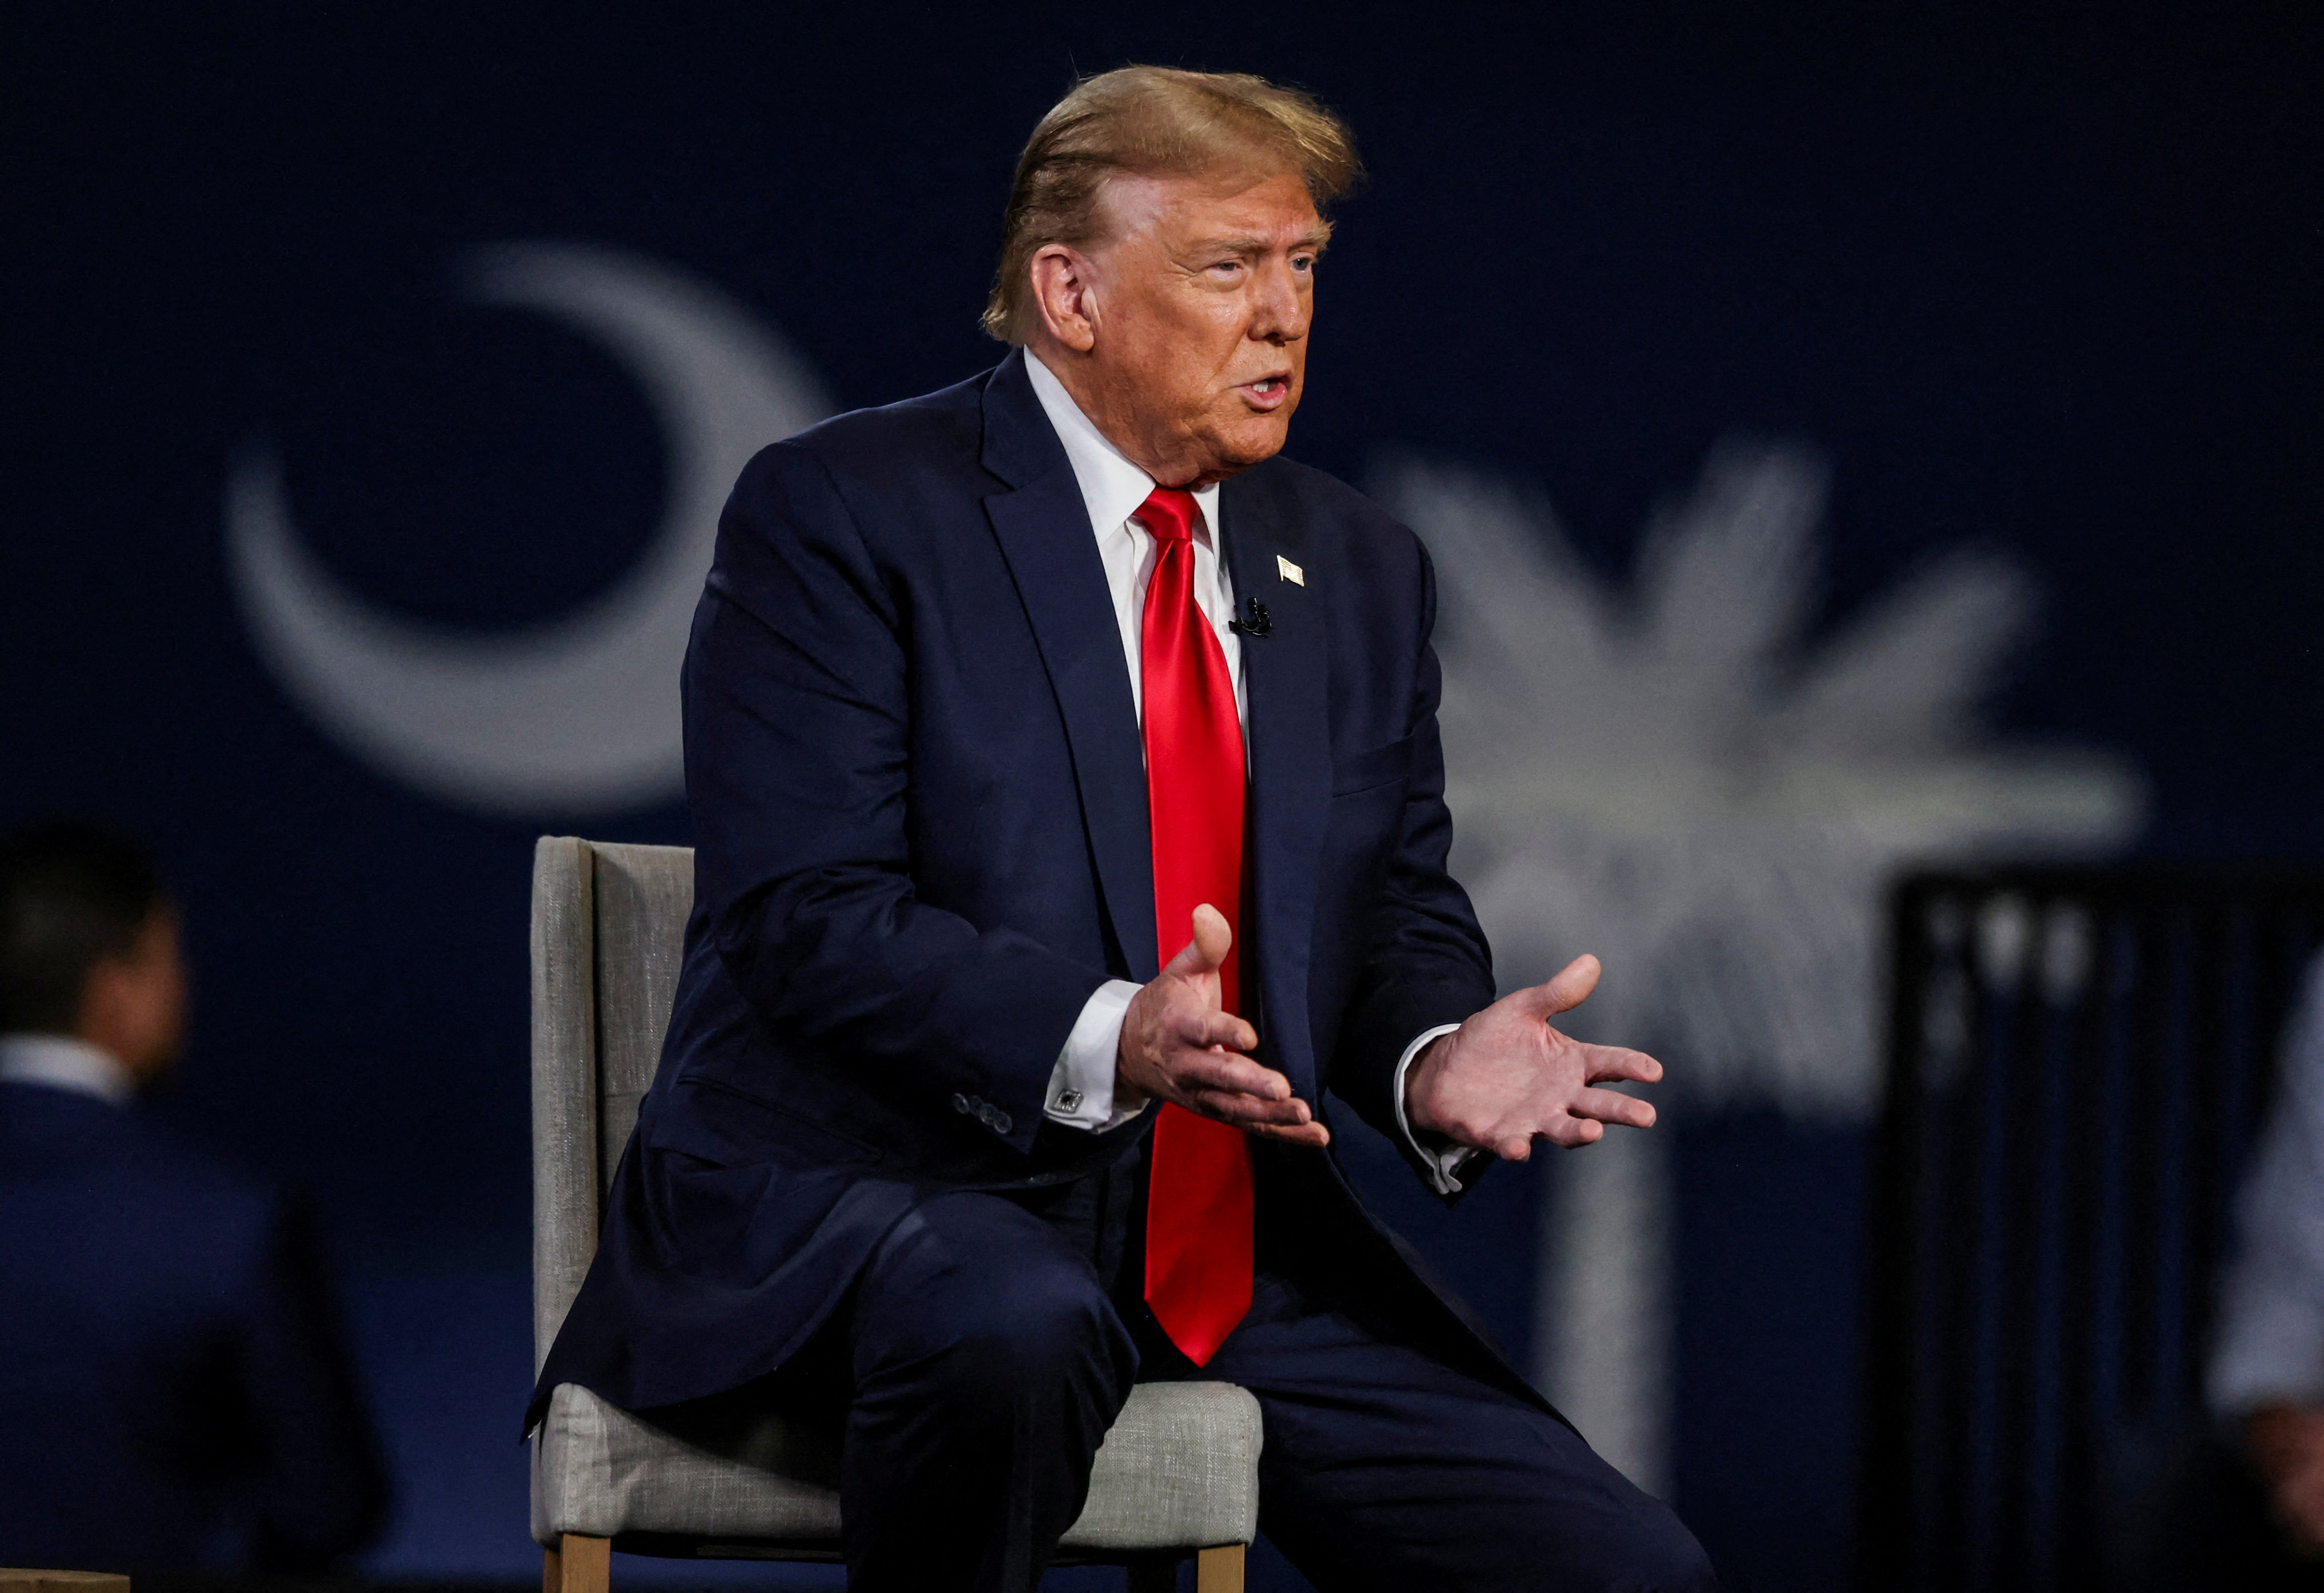 Former US President and Republican presidential candidate Donald Trump participates in a Fox News town hall with Laura Ingraham in Greenville, South Carolina